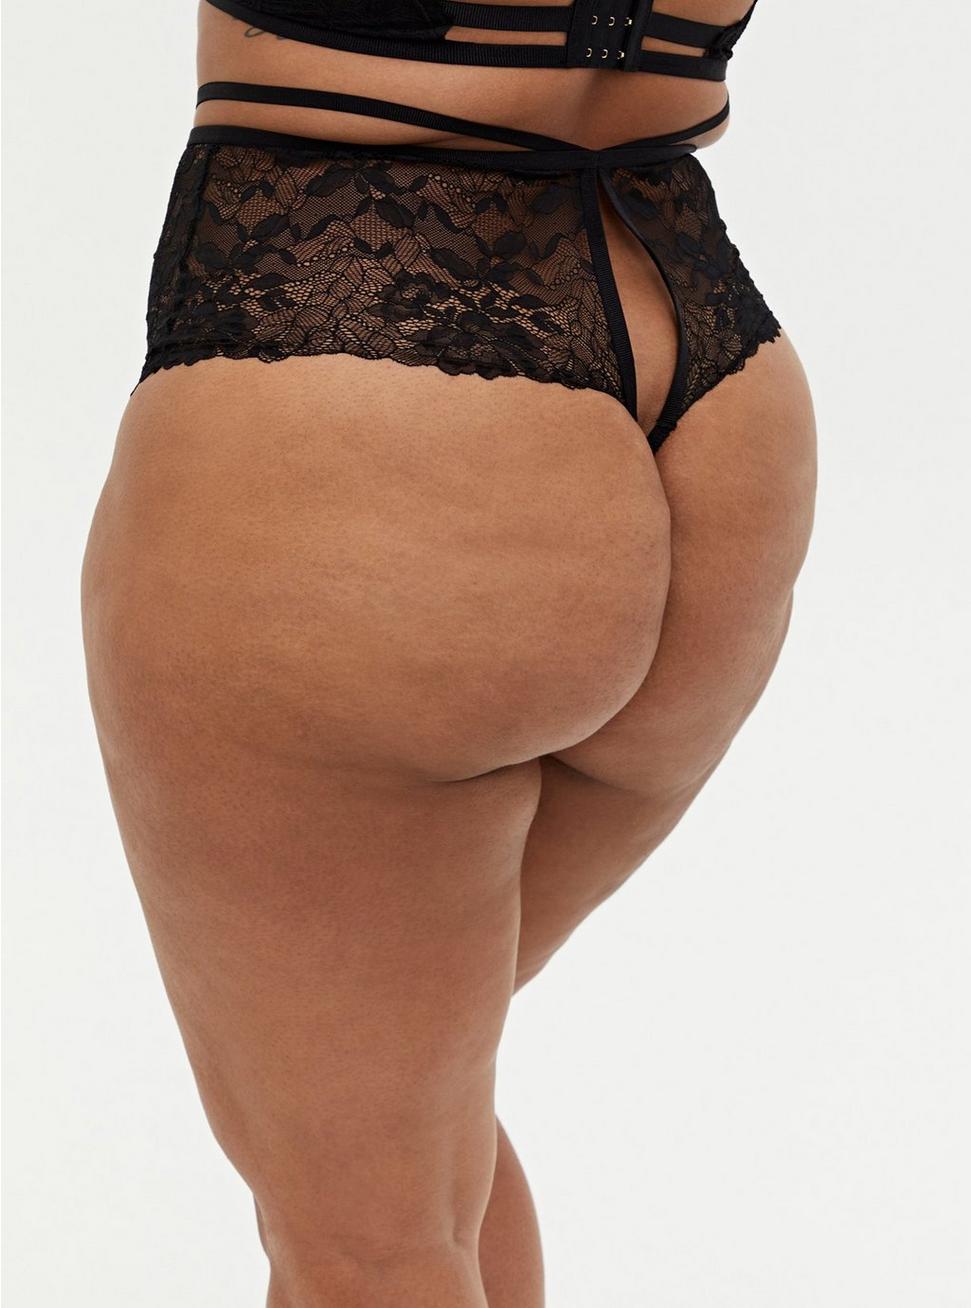 Plus Size - Black Lace Strappy Open Back High Waist Thong Panty